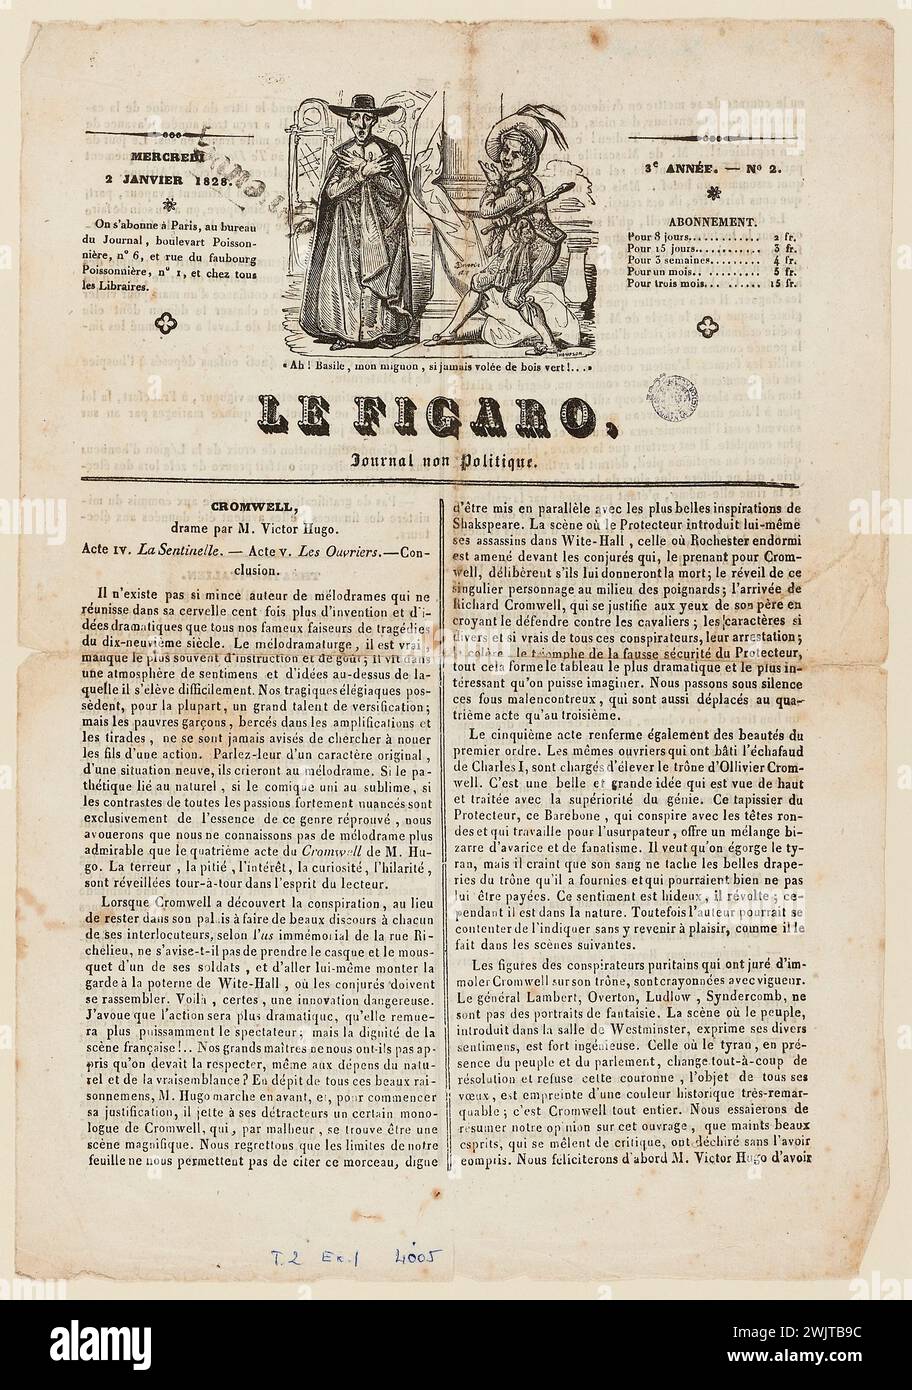 Cromwell, drama by Mr. Victor Hugo. Act IV. The Sentinel. -Act V. The workers. Le Figaro, non-political newspaper, Wednesday January 2, 1828 (dummy title), 1828-01-02. Ink on paper. Houses of Victor Hugo Paris - Guernsey. Stock Photo